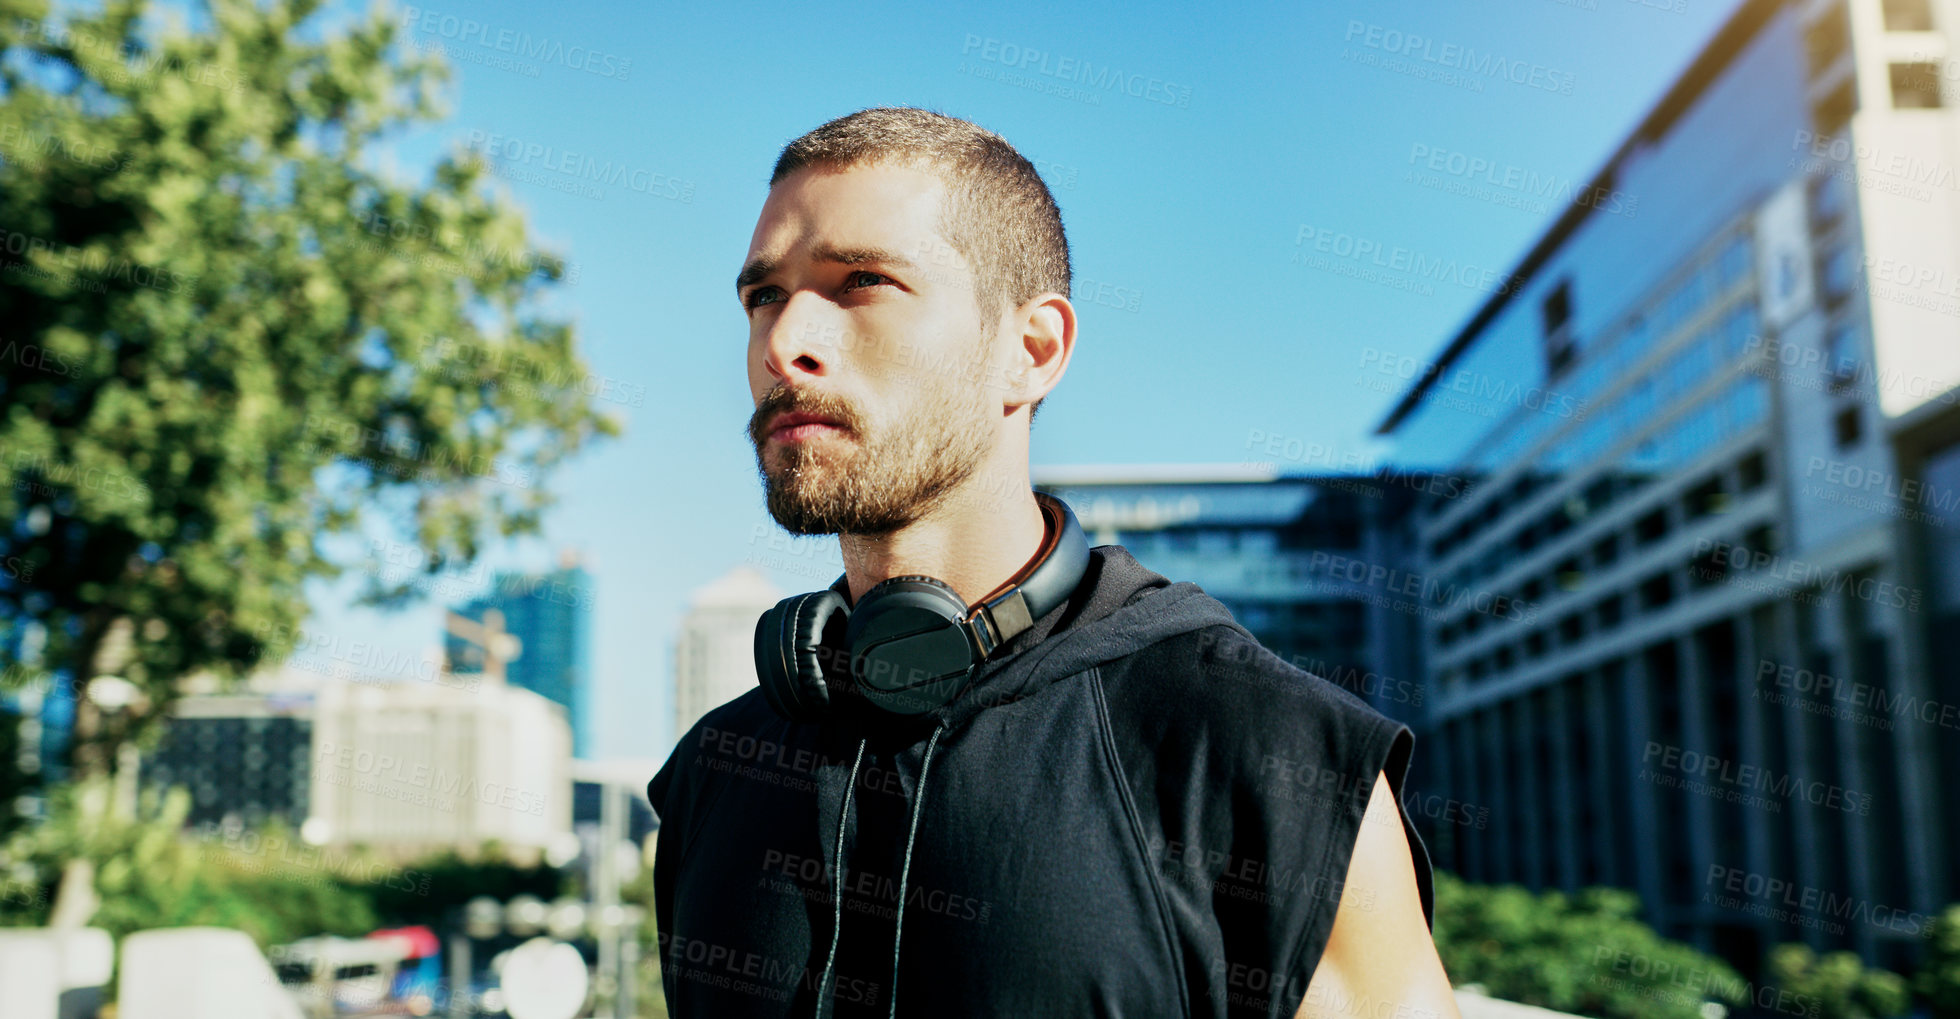 Buy stock photo Shot of a young man going for a workout in the city